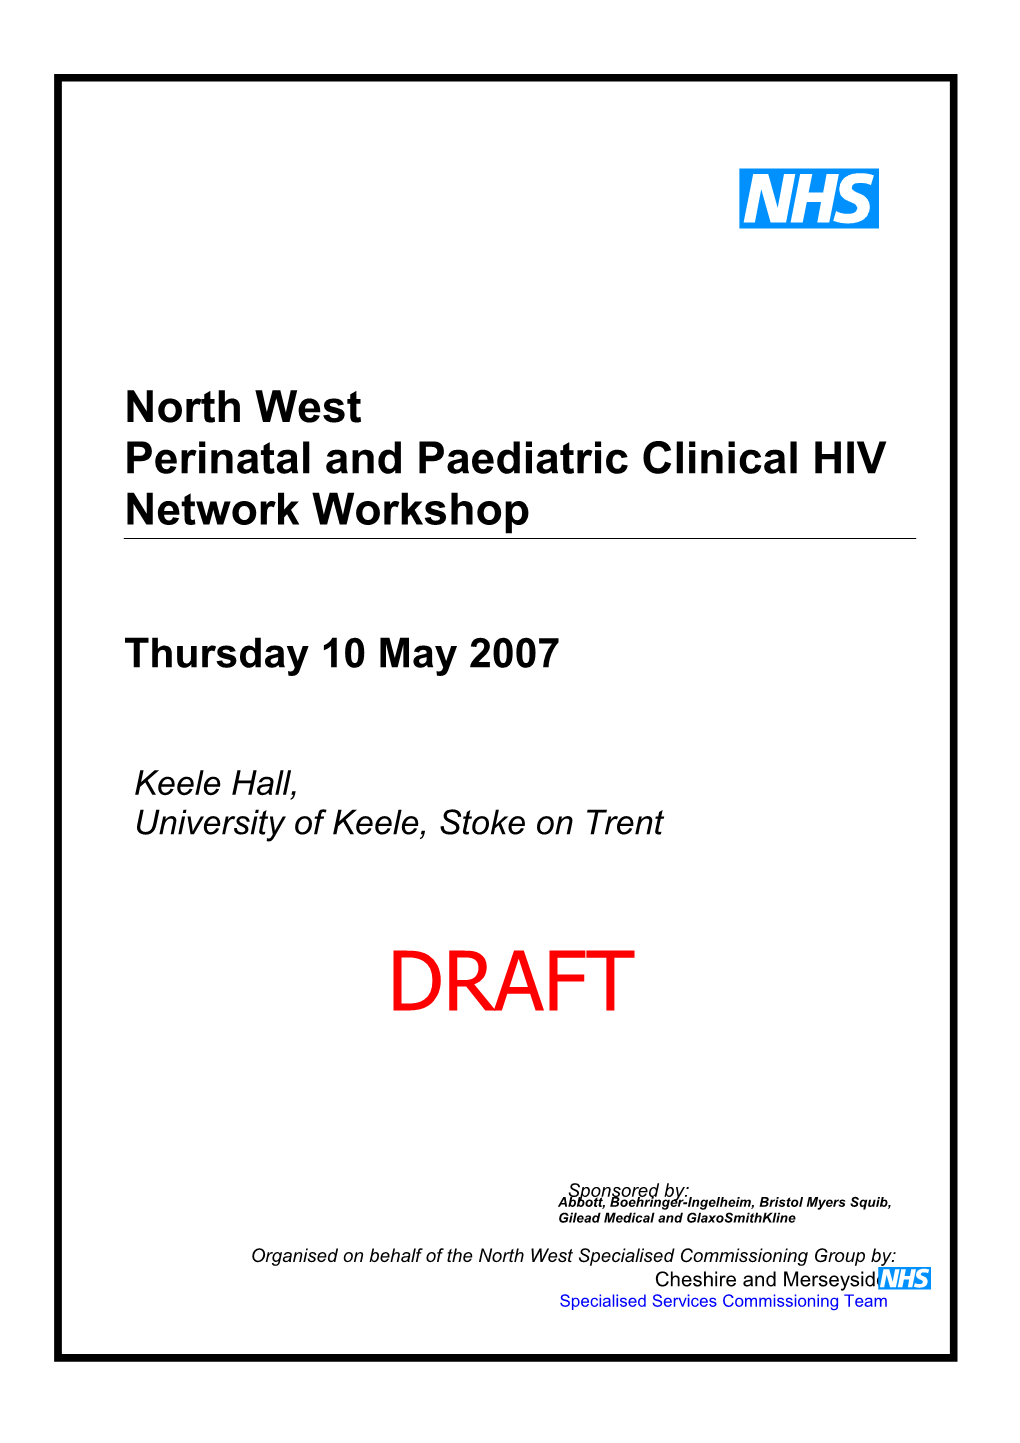 Perinatal and Paediatric Clinical HIV Network Workshop